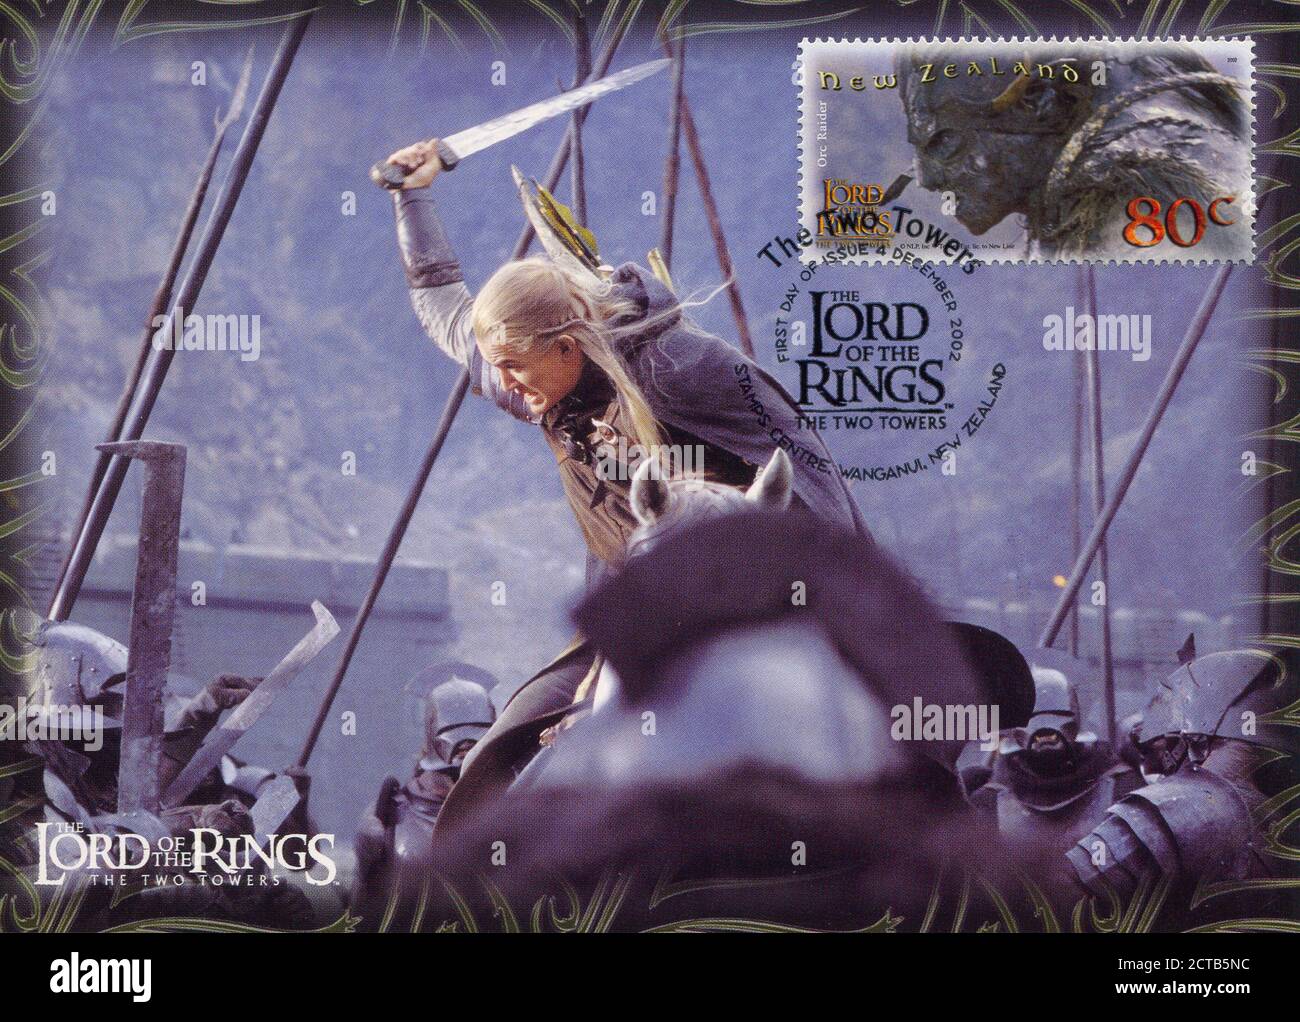 NEW ZEALAND - CIRCA 2002: stamp printed by New Zealand, shows Scenes from The Lord of the Rings, circa 2002 Stock Photo